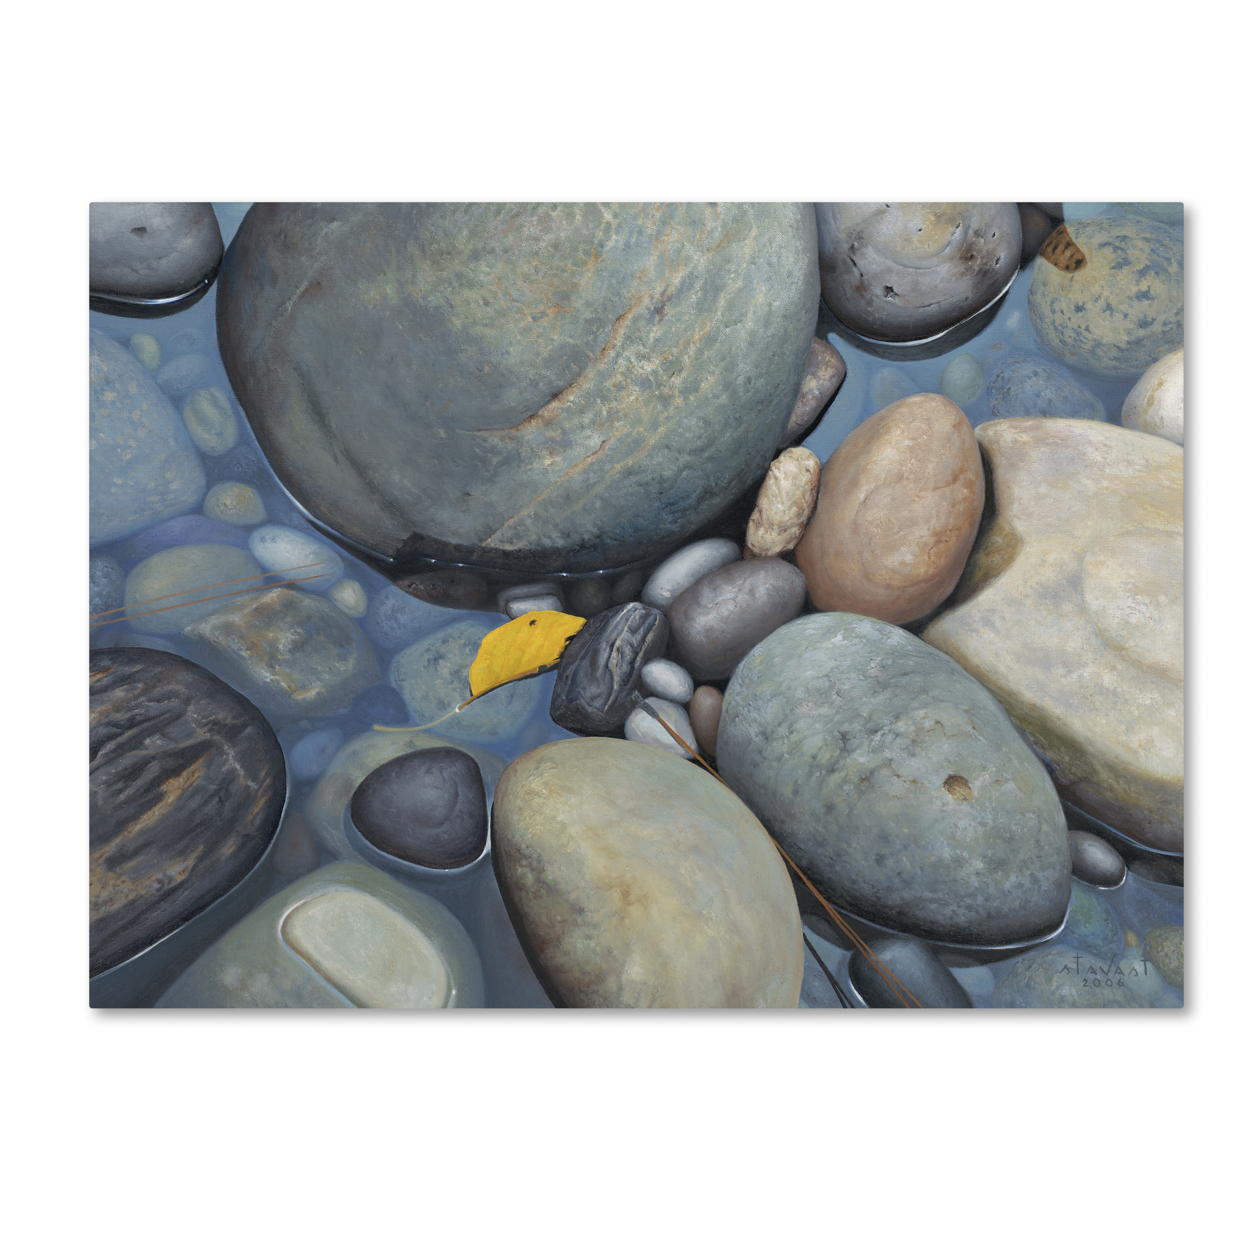 Stephen Stavast 'Reflections On A Gray Day' Canvas Wall Art 35 X 47 Inches